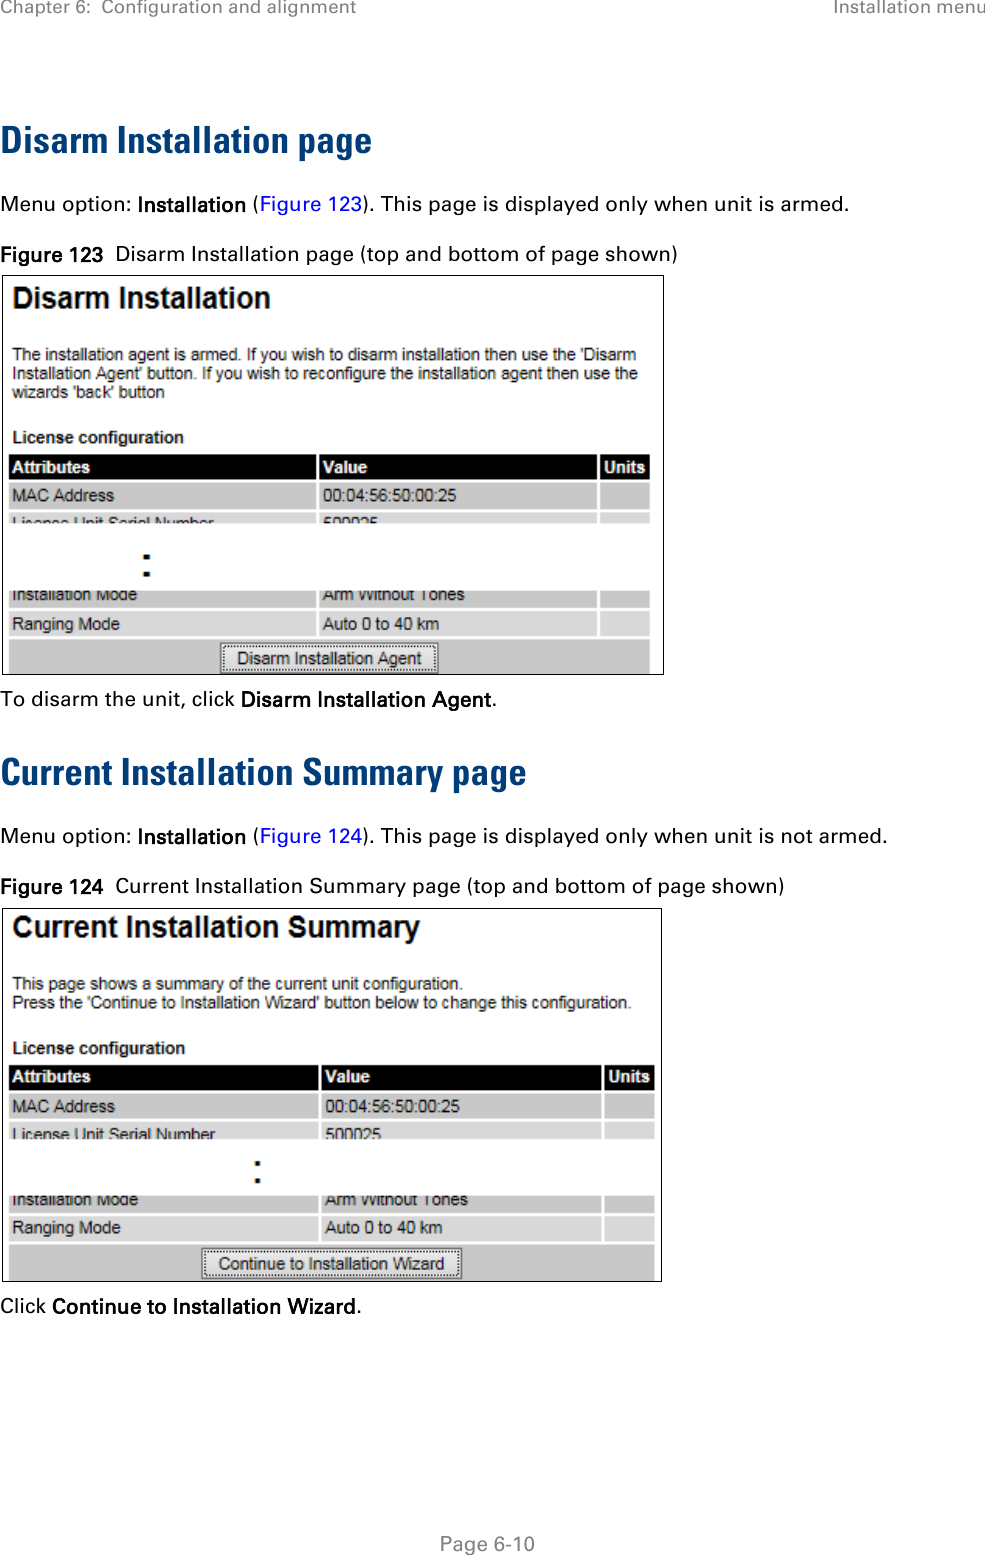 Chapter 6:  Configuration and alignment Installation menu  Disarm Installation page Menu option: Installation (Figure 123). This page is displayed only when unit is armed. Figure 123  Disarm Installation page (top and bottom of page shown)  To disarm the unit, click Disarm Installation Agent. Current Installation Summary page Menu option: Installation (Figure 124). This page is displayed only when unit is not armed.  Figure 124  Current Installation Summary page (top and bottom of page shown)  Click Continue to Installation Wizard.  Page 6-10 